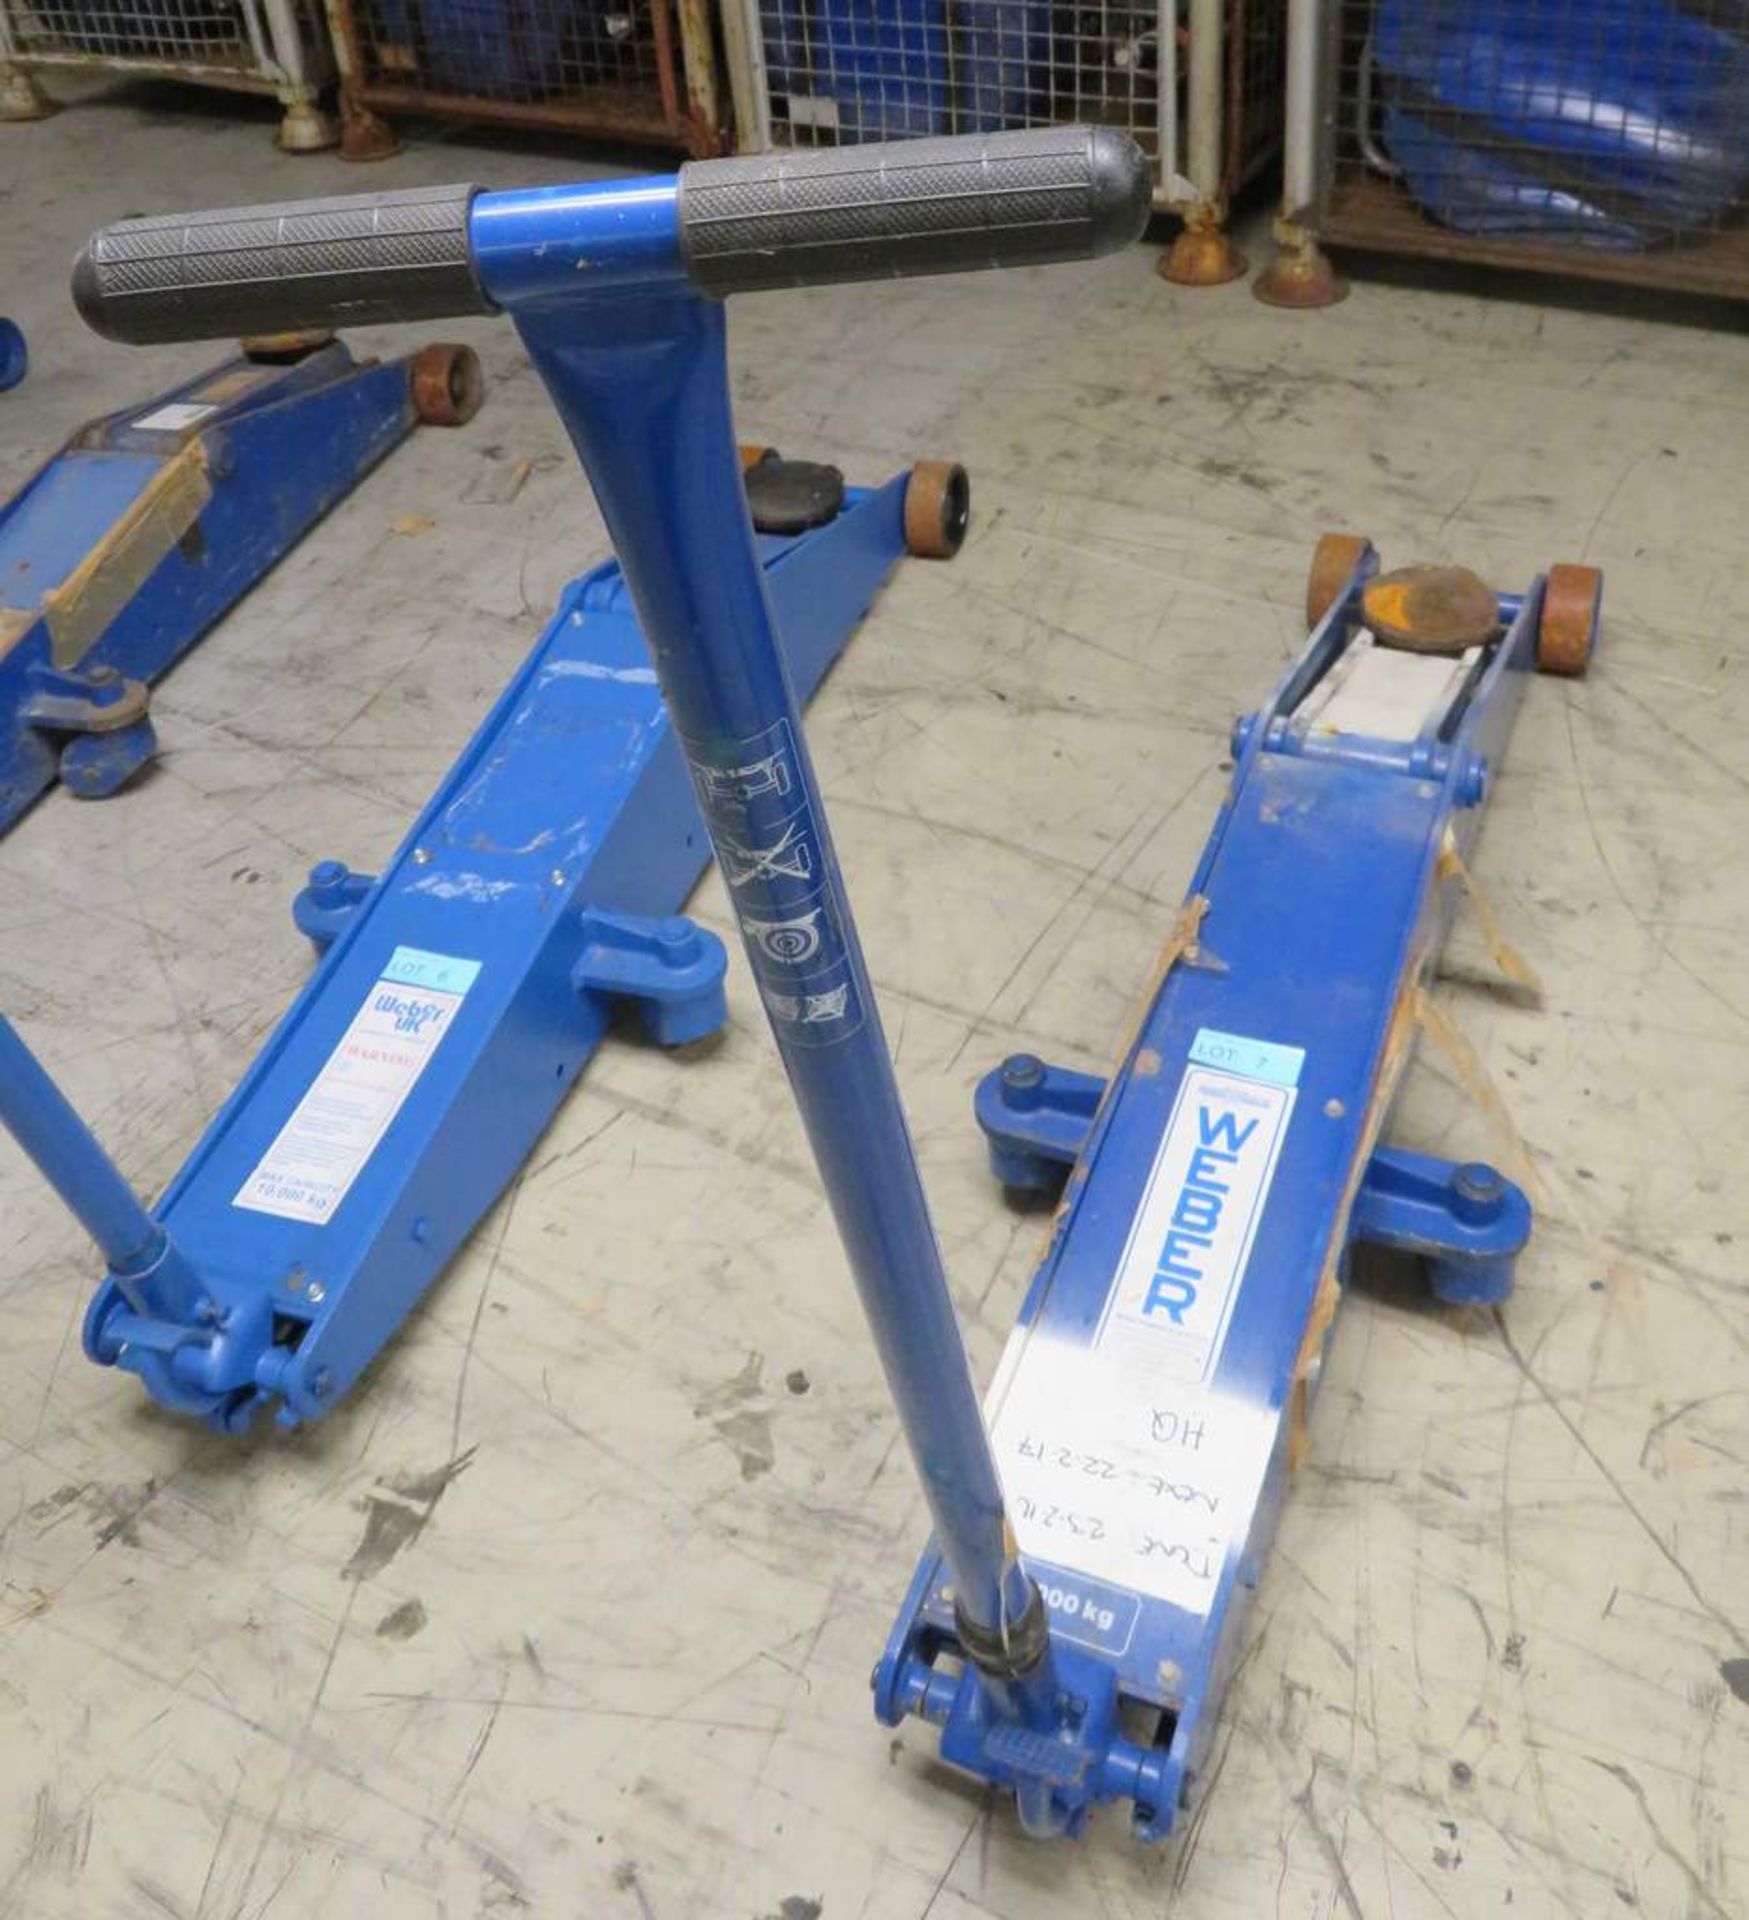 Weber 10 Tonne Vehicle Trolley Jack Complete With Handle - WDK100LQ - Working Condition - Image 2 of 7